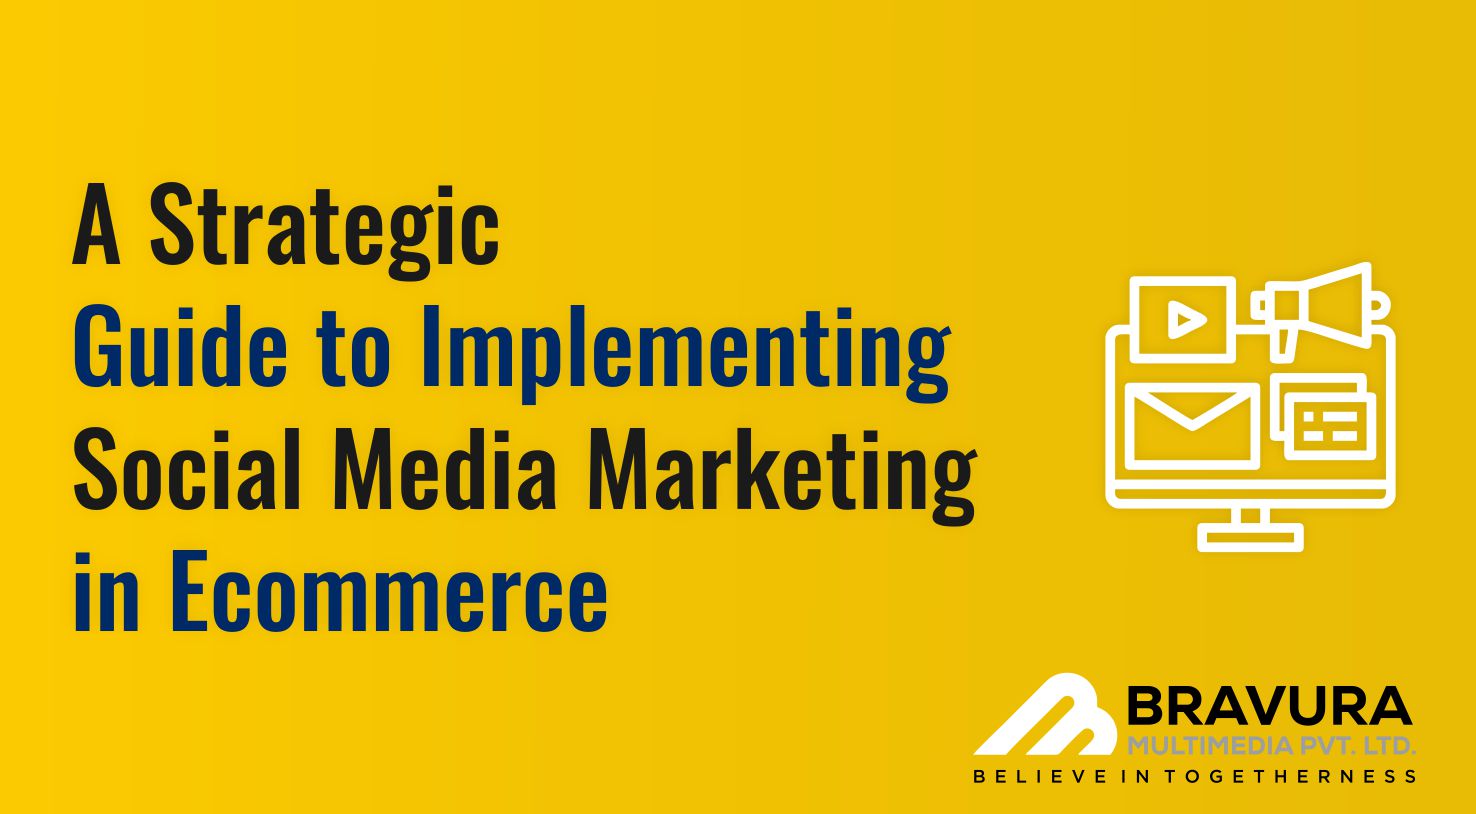 A Strategic Guide to Implementing Social Media Marketing in eCommerce